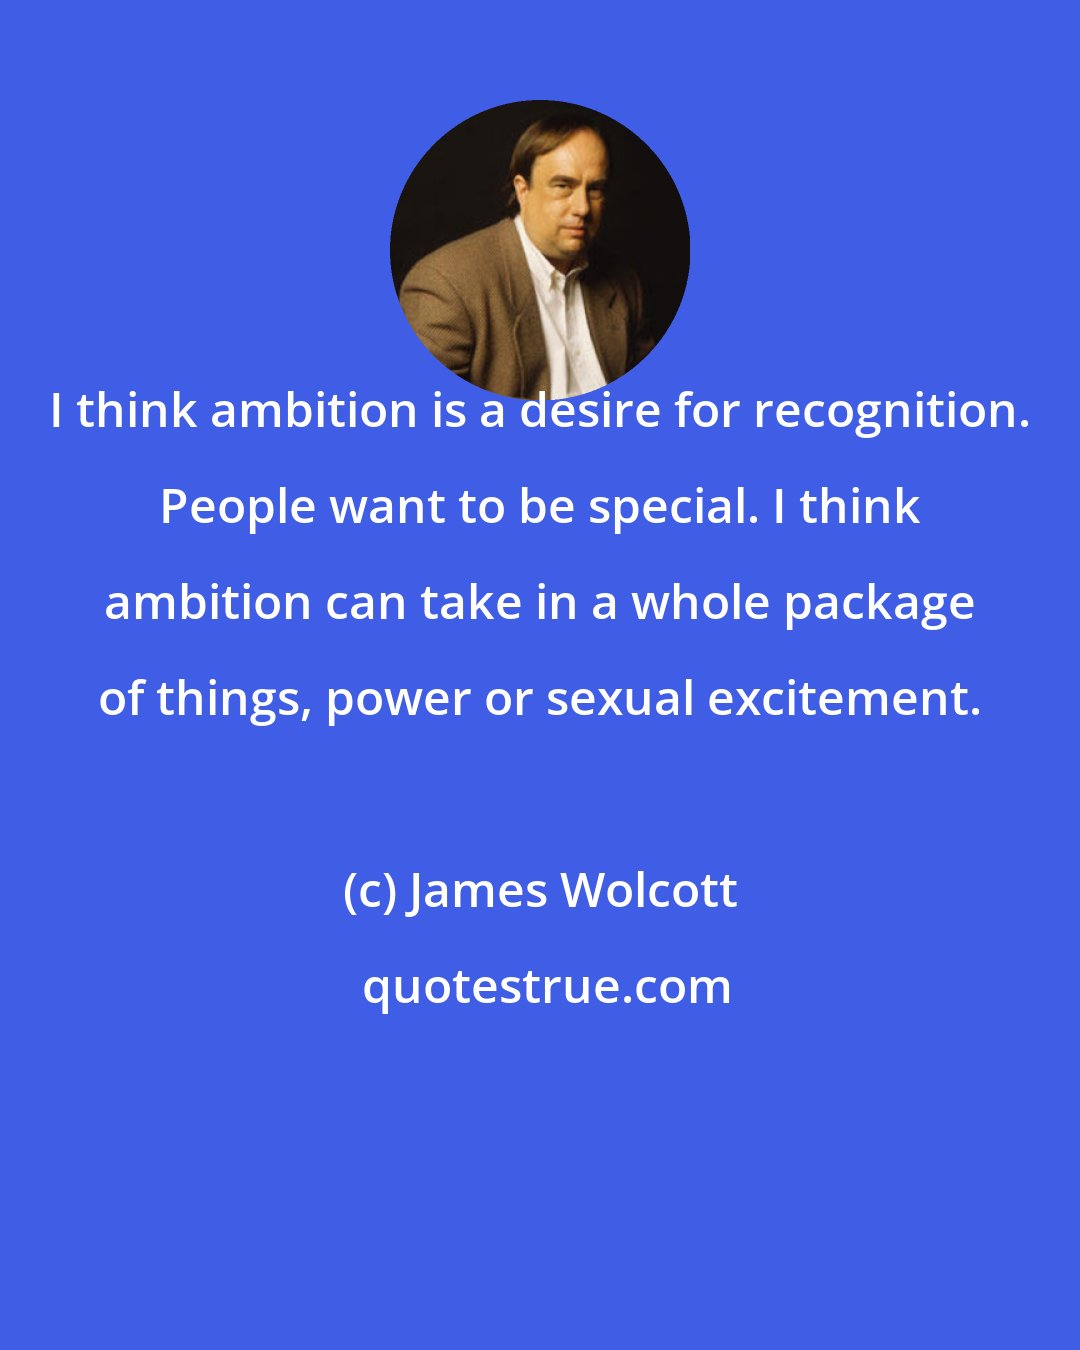 James Wolcott: I think ambition is a desire for recognition. People want to be special. I think ambition can take in a whole package of things, power or sexual excitement.